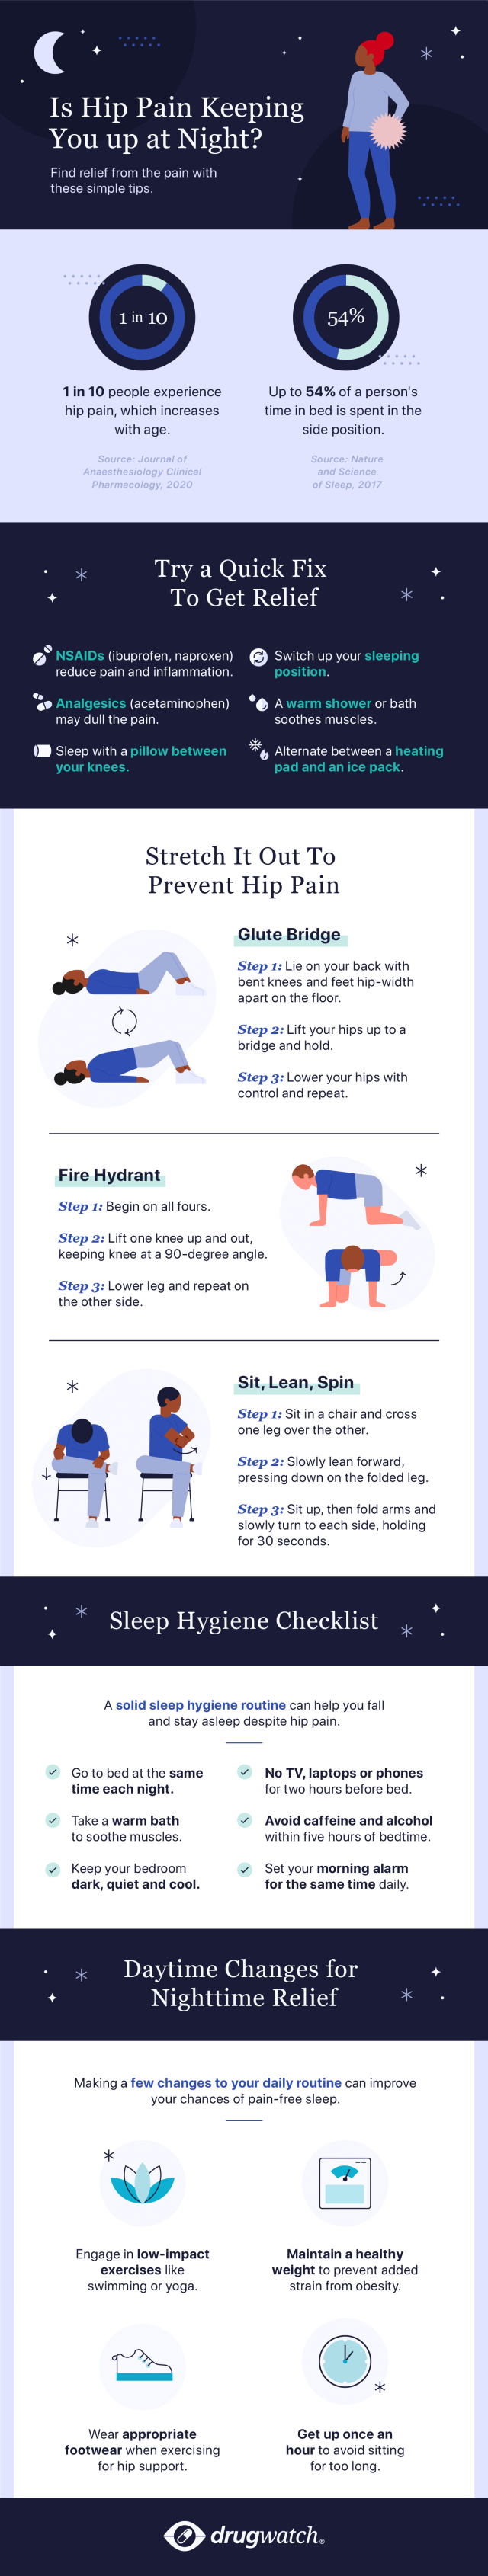 https://www.drugwatch.com/wp-content/uploads/hip-pain-at-night-infographic-640x0-c-default.png